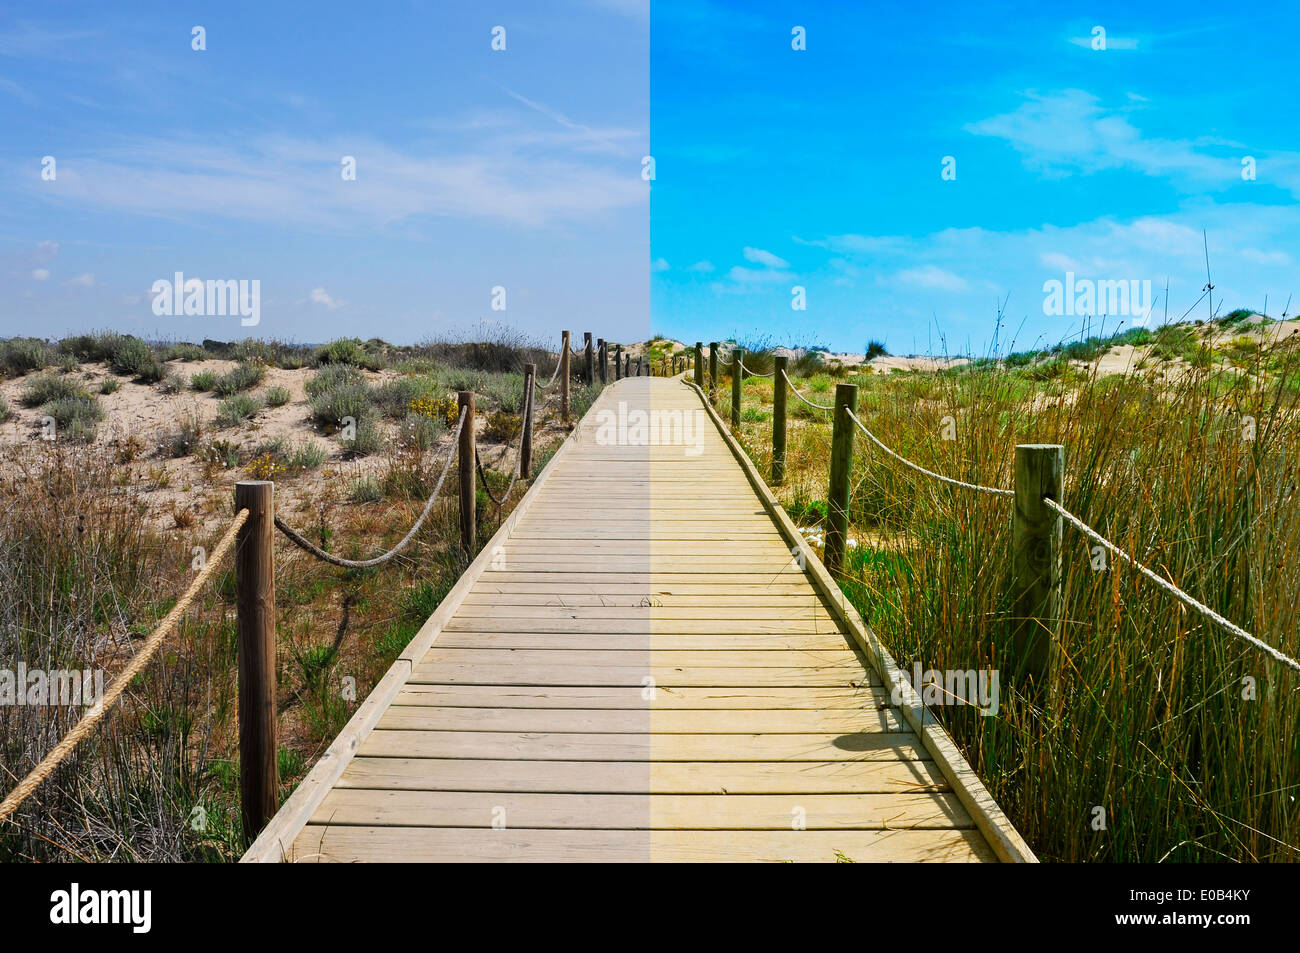 landscape with a broadwalk before and after the image editing process Stock Photo